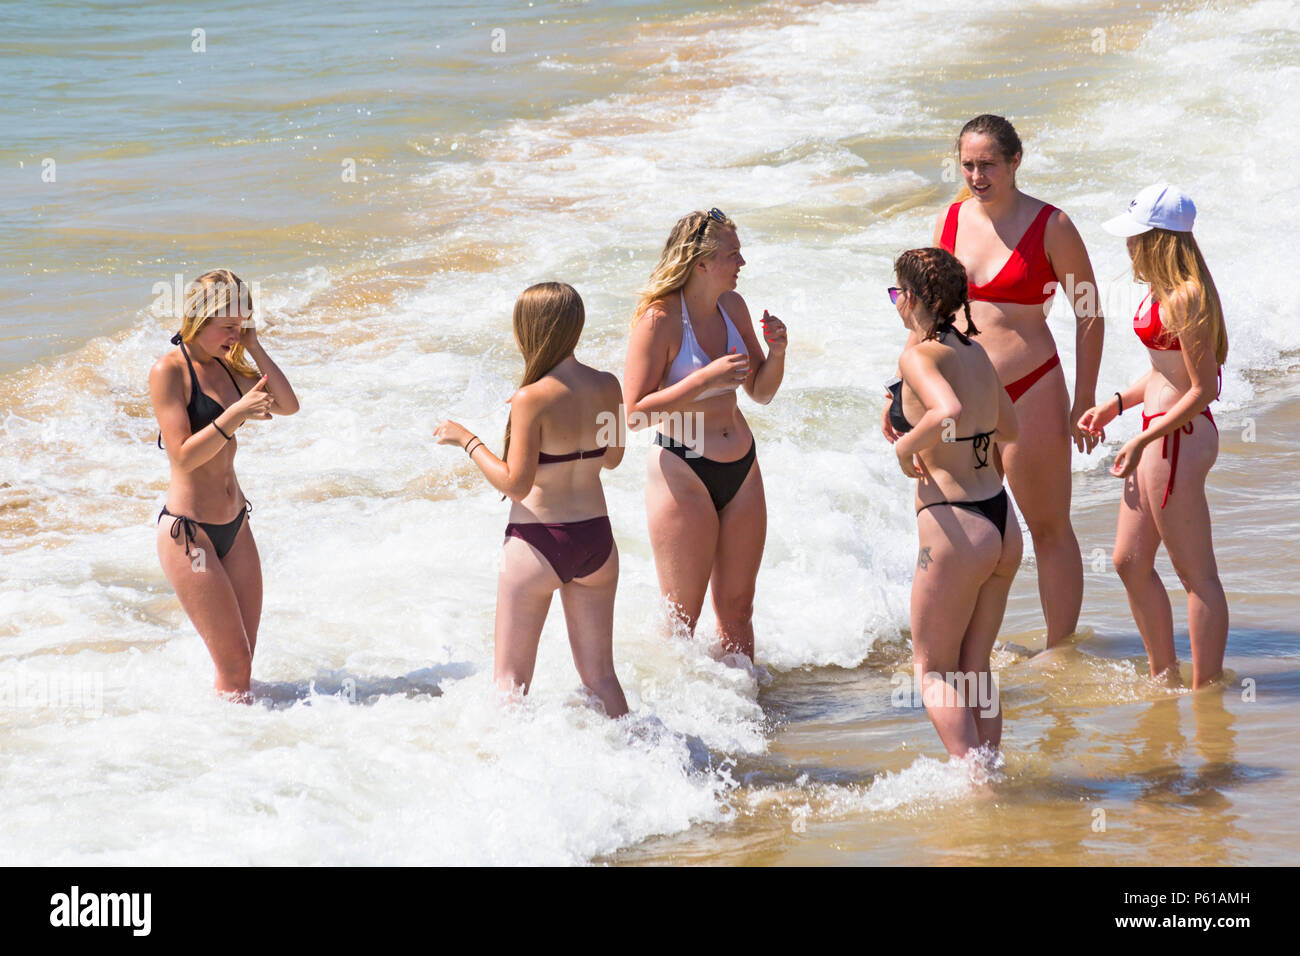 Bournemouth, Dorset, UK. 28th June, 2018. UK weather: sunseekers head to the beaches at Bournemouth on another hot sunny day with unbroken blue skies and sunshine. A slight breeze makes the heat more bearable. A group of friends in skimpy bikinis have fun playing in the sea. Credit: Carolyn Jenkins/Alamy Live News Stock Photo